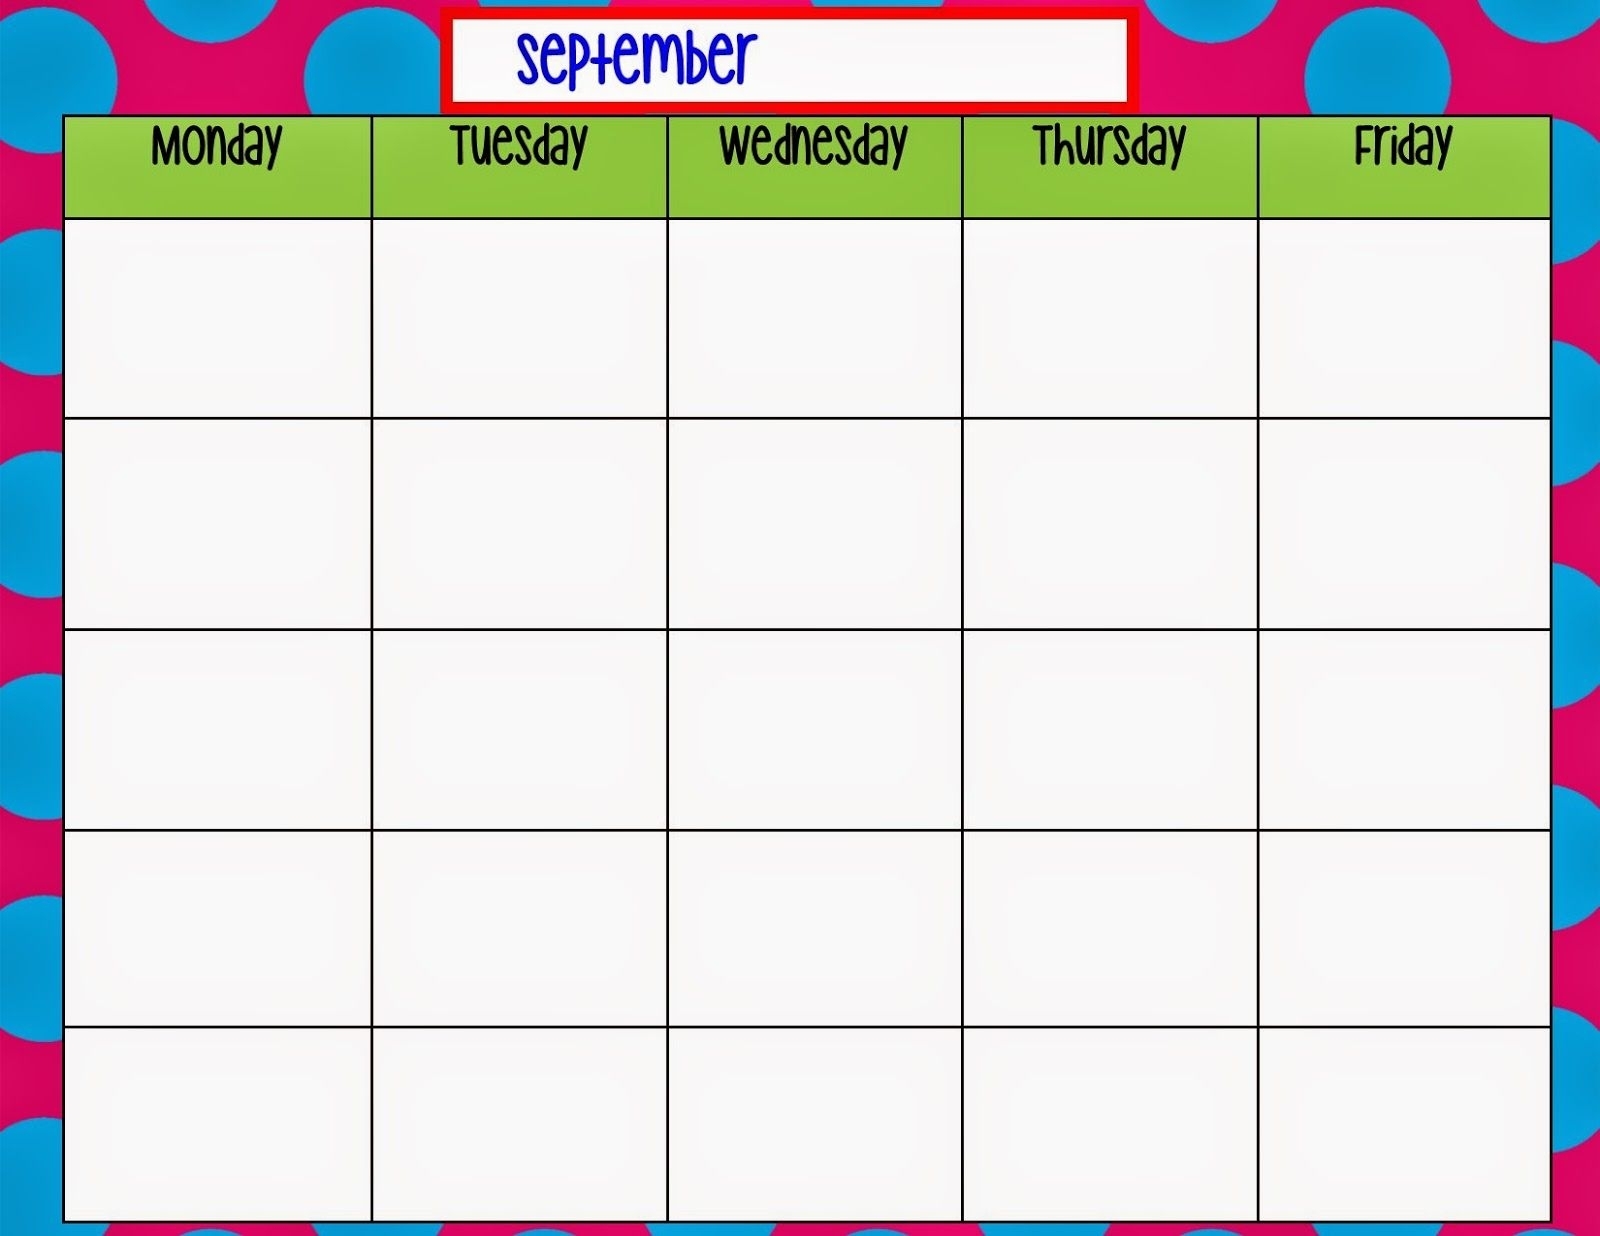 Schedule Template Monday Through Friday Weekly R Word Monthly | Smorad intended for Monday Through Friday Monthly Calendar